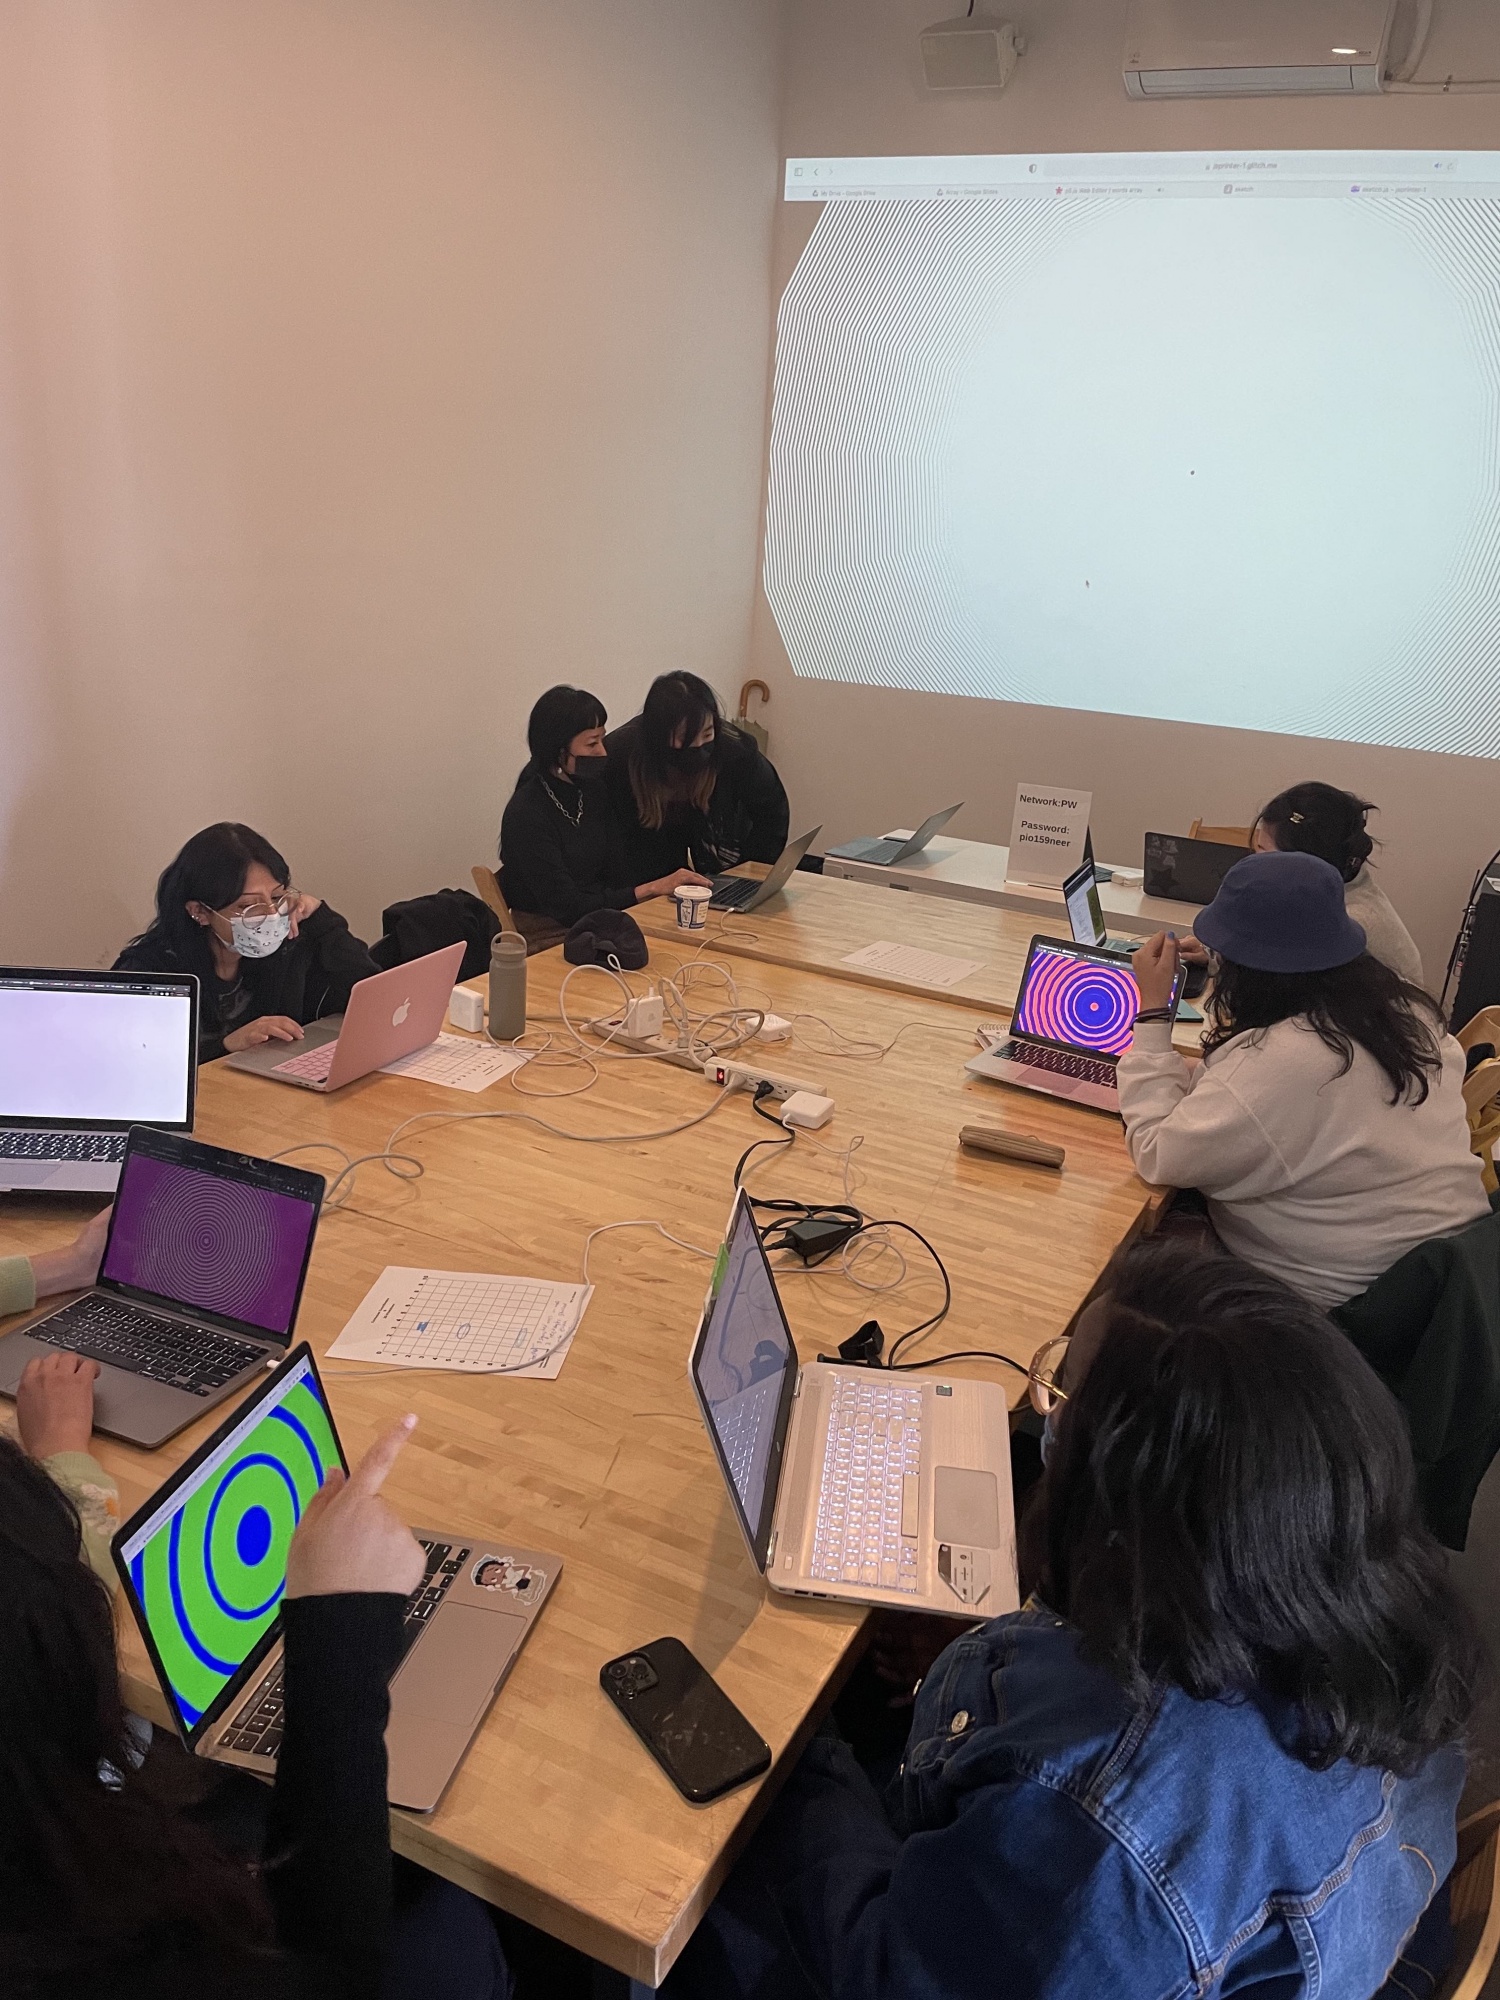 Workshop participants work on their laptops around a long rectangular table. Their laptop screens show remixes of the circular visual pattern projected on the wall.